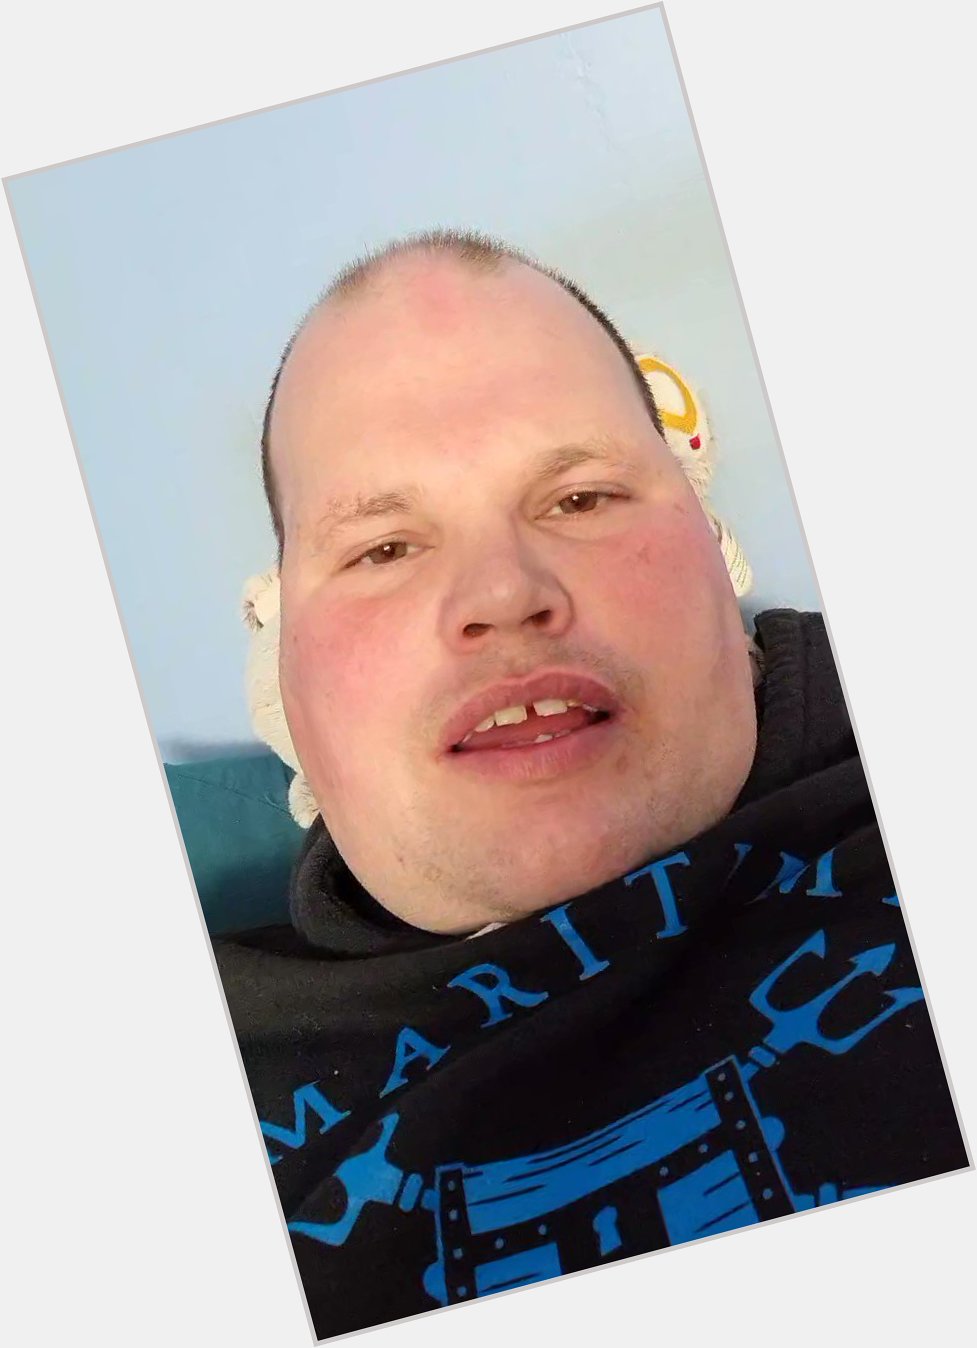  Happy Birthday Robert Downey Jr and have a great birthday from Frankie MacDonald 